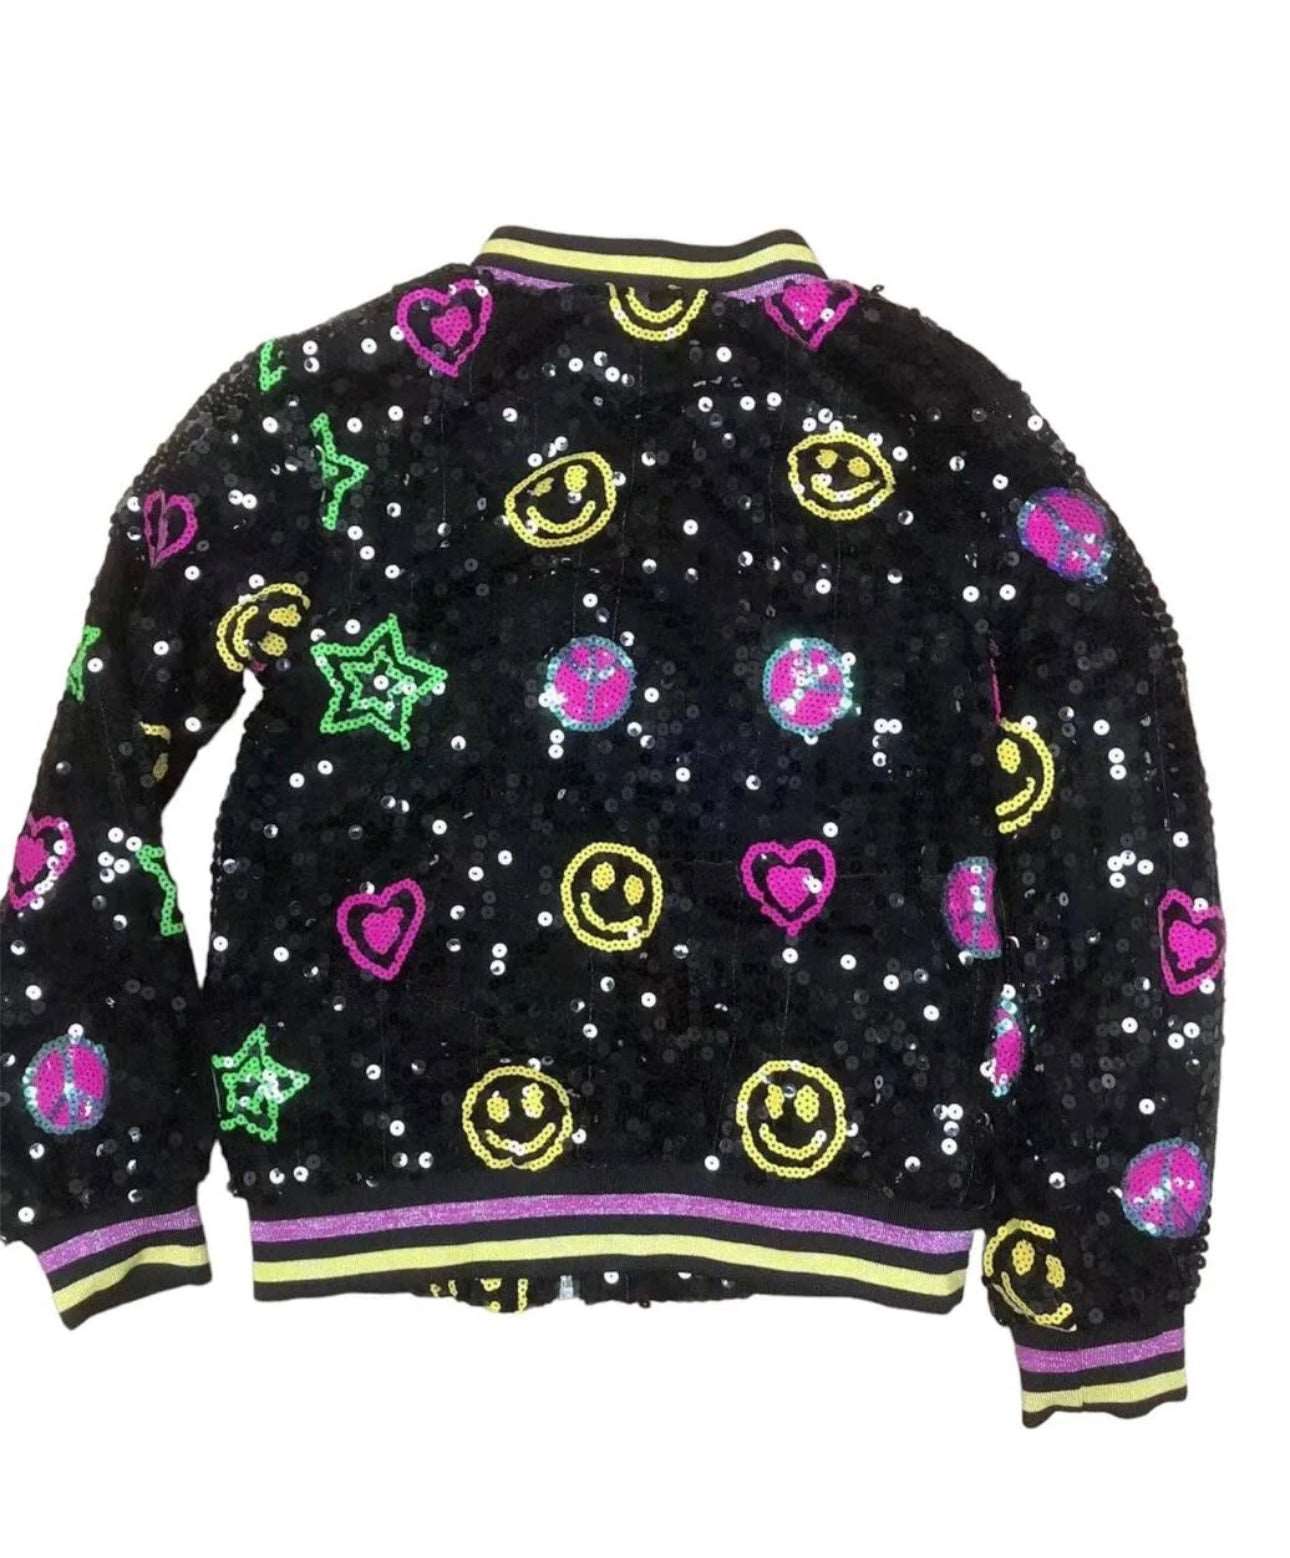 PEACE AND LOVE SEQUIN BOMBER